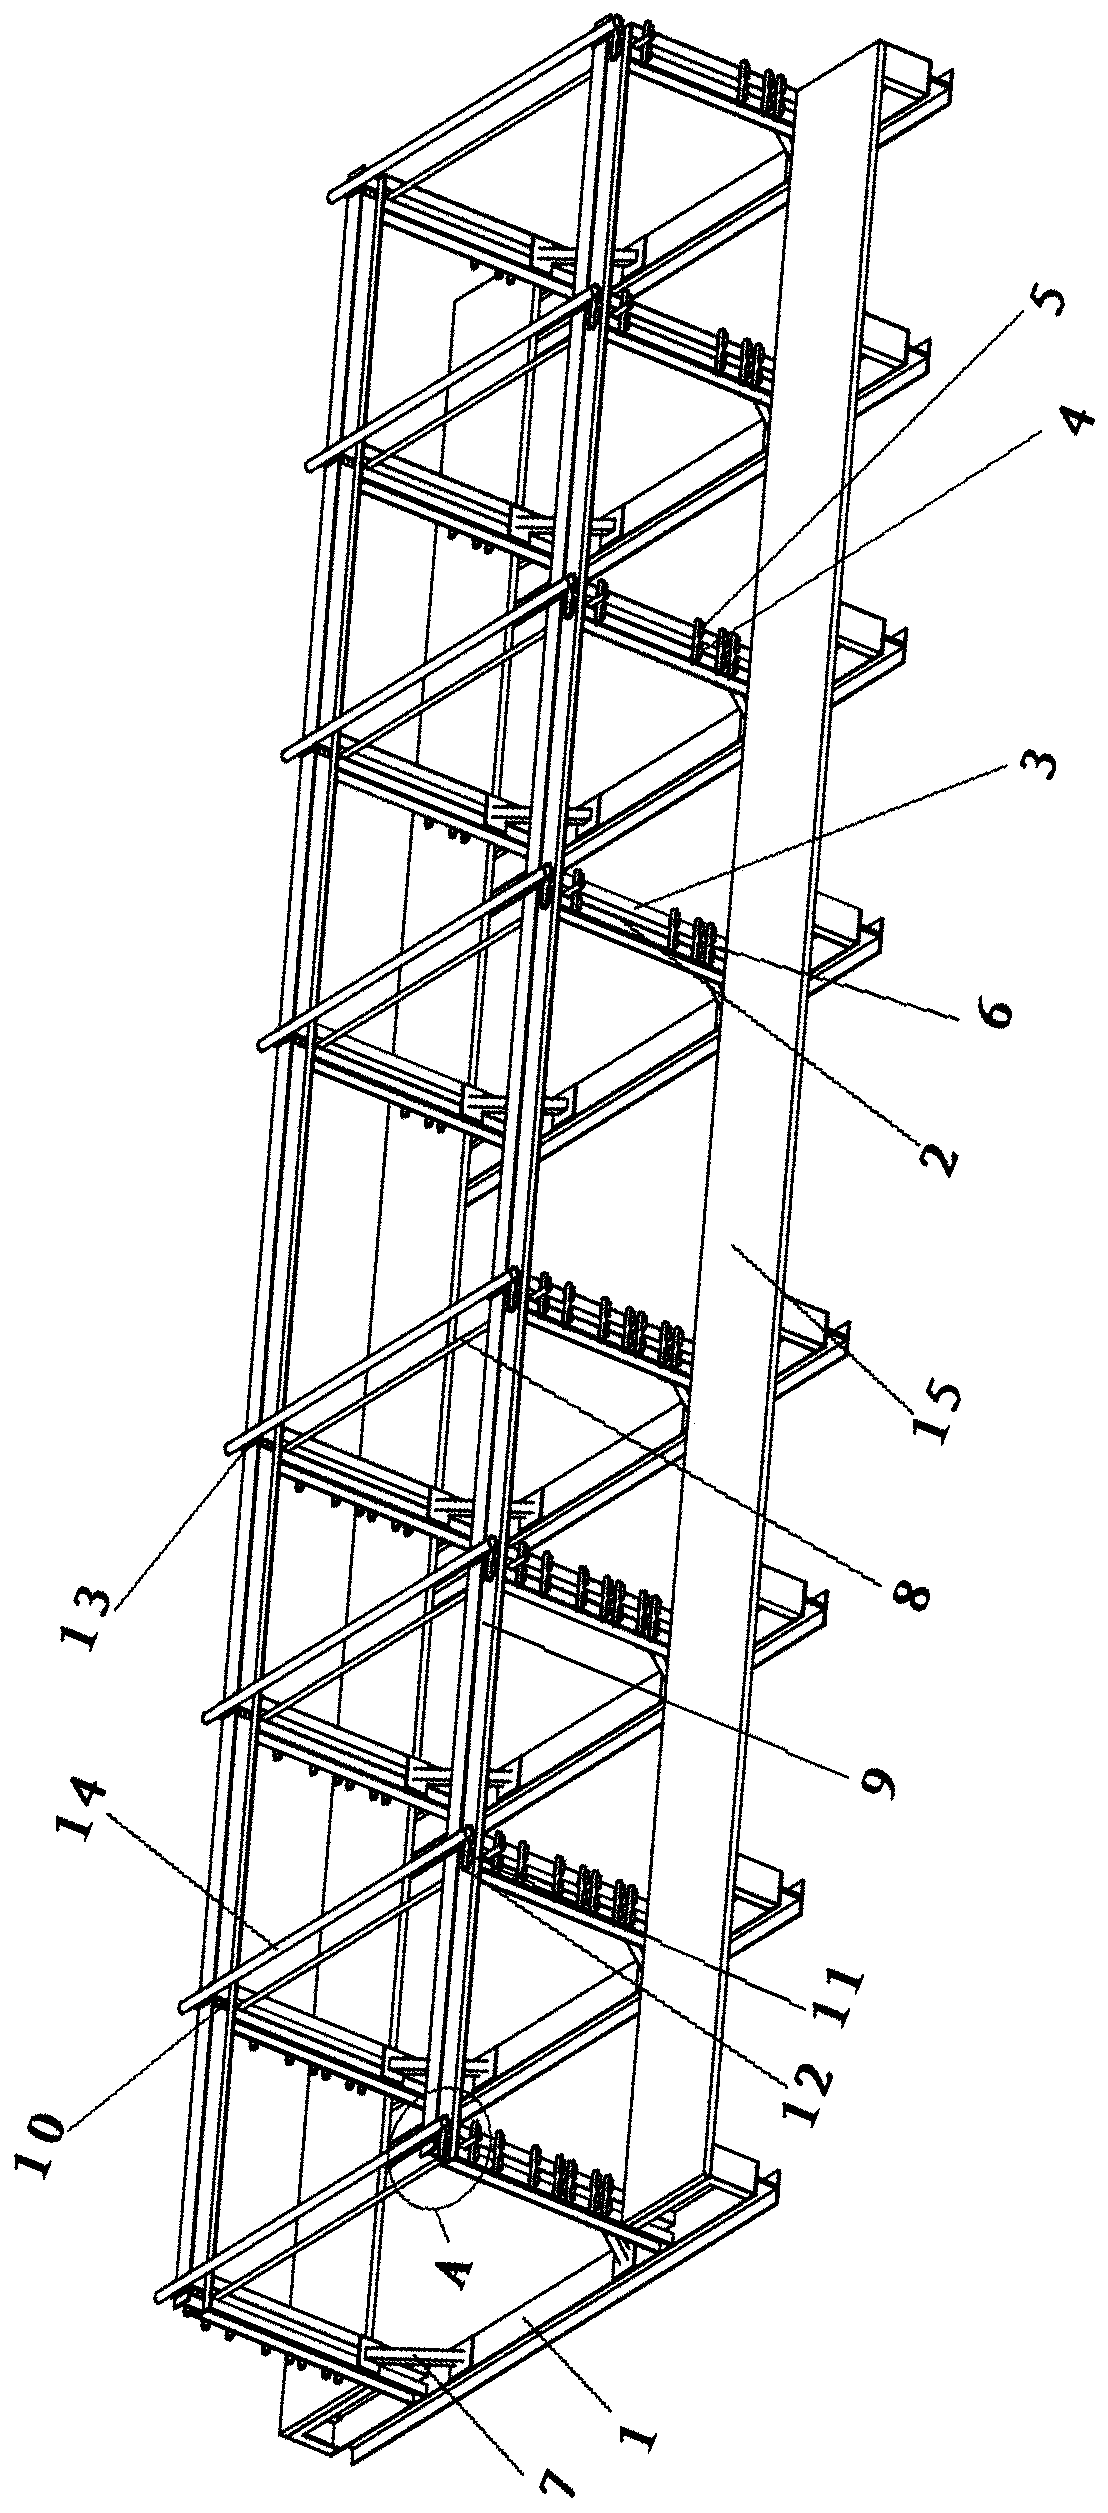 An operating mechanism and method for forming a steel cage with a protective layer